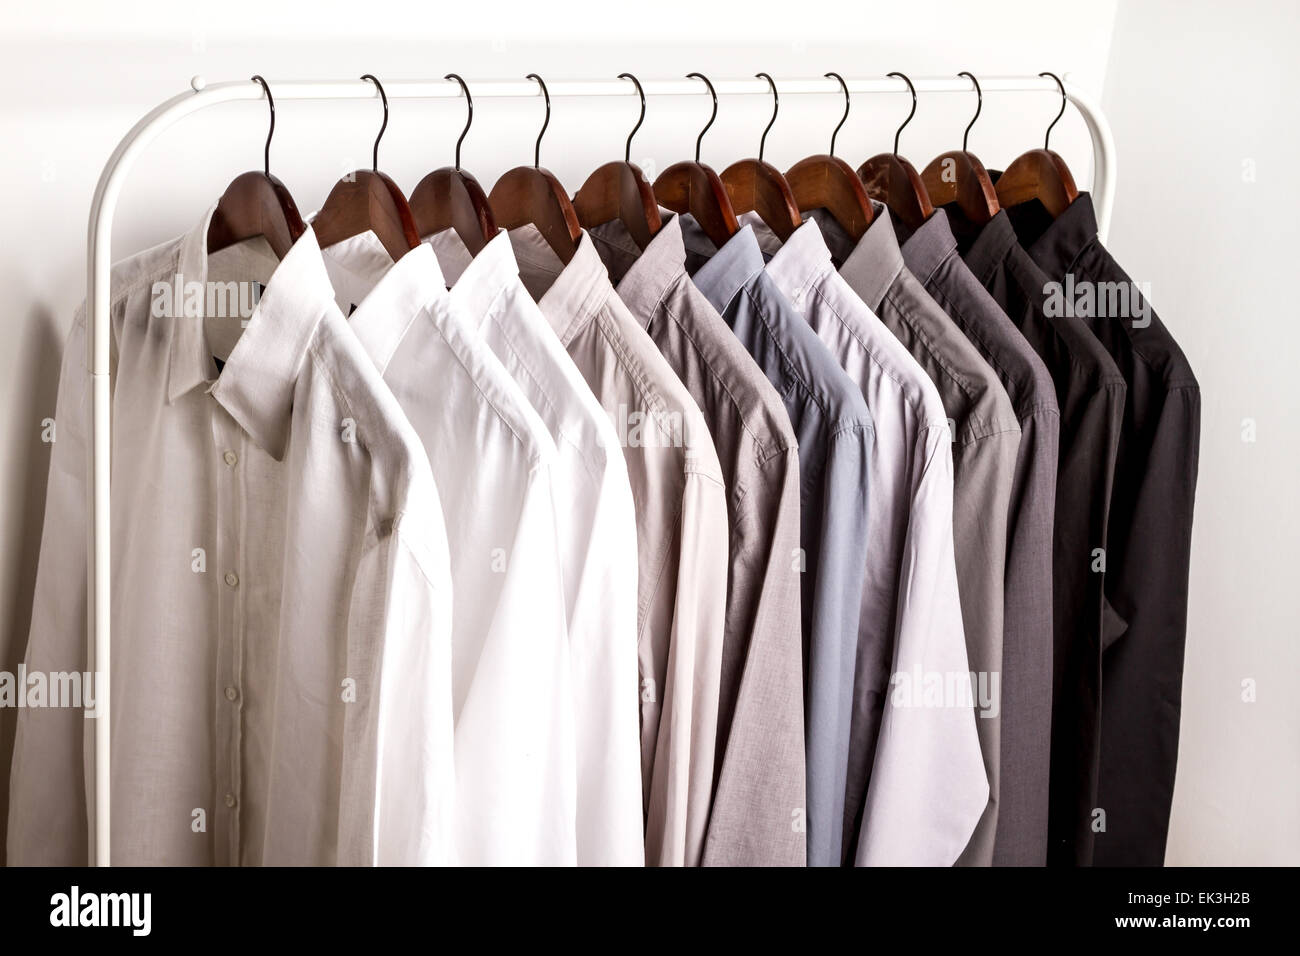 Several shirts on a hanger from white to black color range Stock Photo